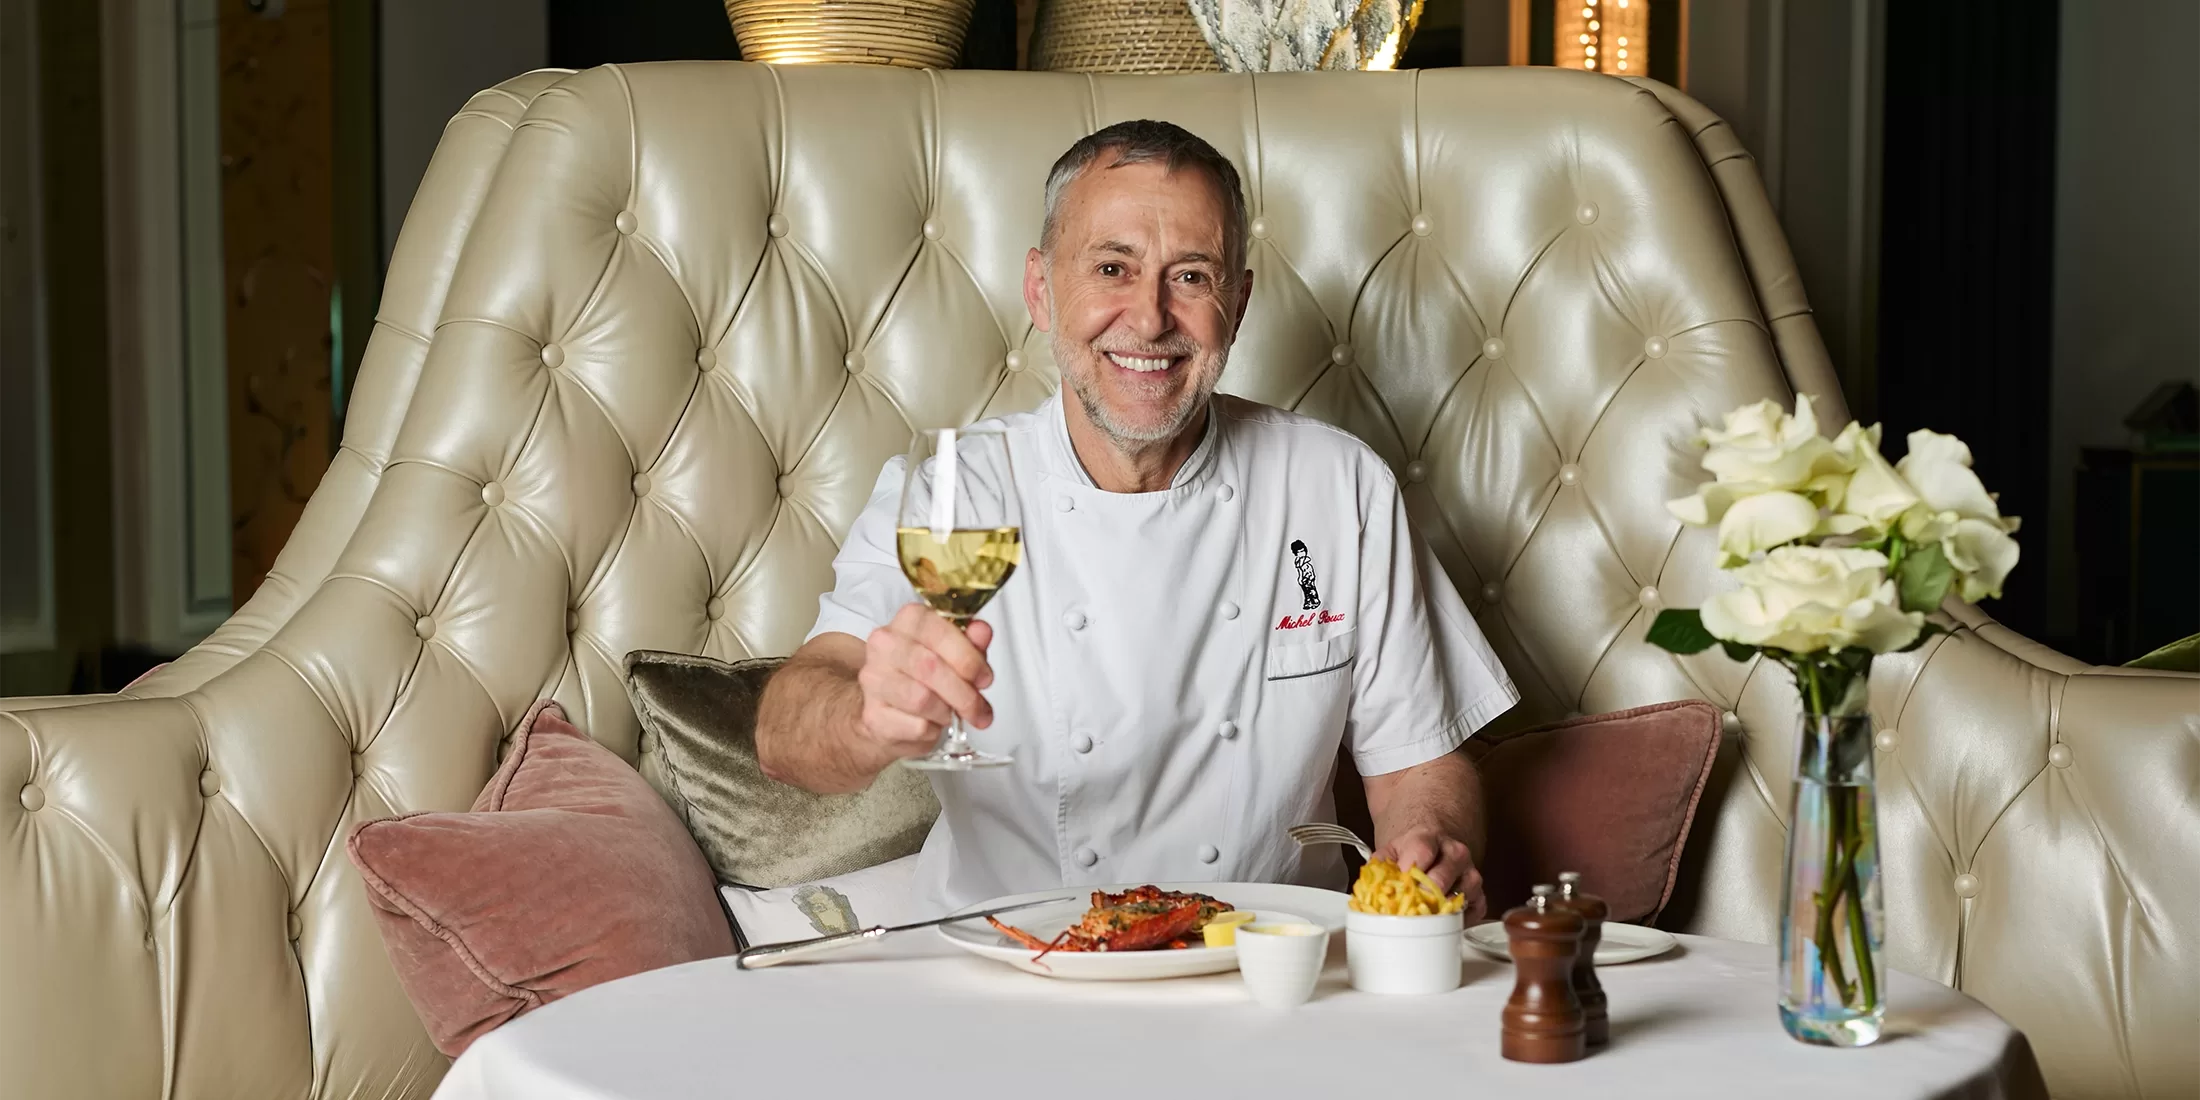 Michel Roux sat at a tall leather back quilted dining booth, smiling with a glass of white wine in hand and a table full of food at Chez Roux at The Langham, London